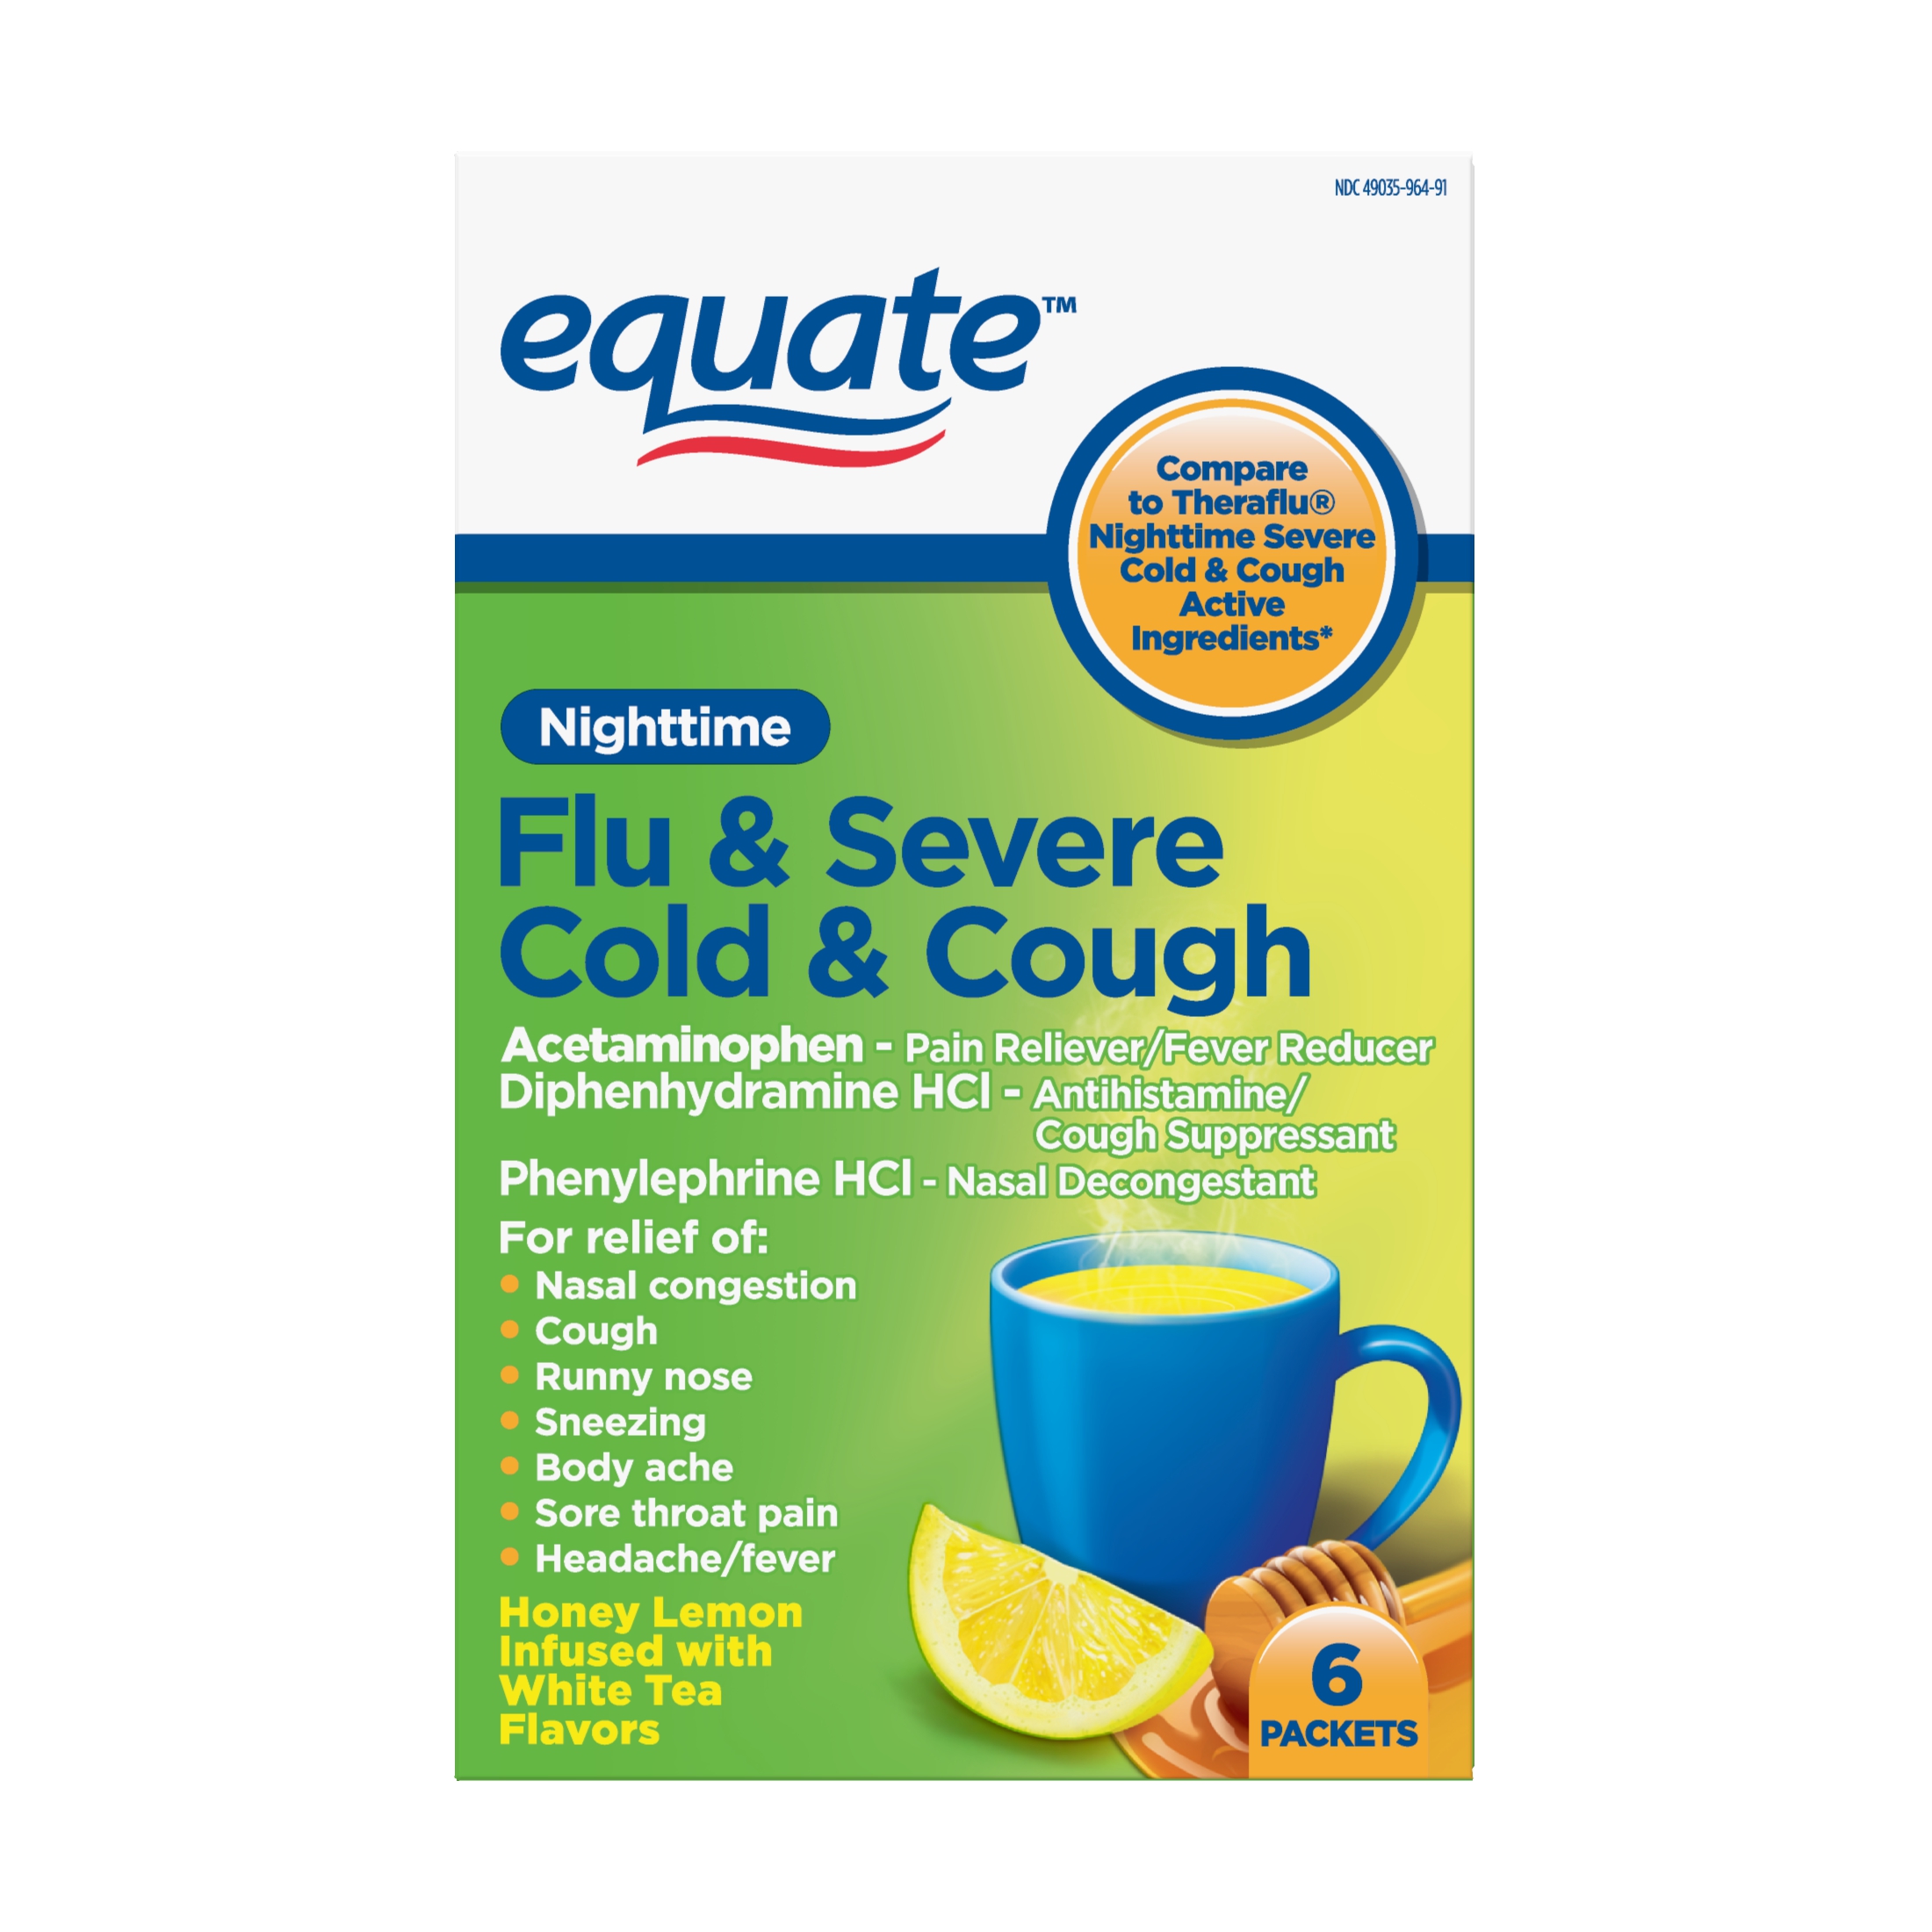 Severe Cold, Cough and Flu Powder, Nighttime Hot Liquid Therapy, 6 Count - image 1 of 7